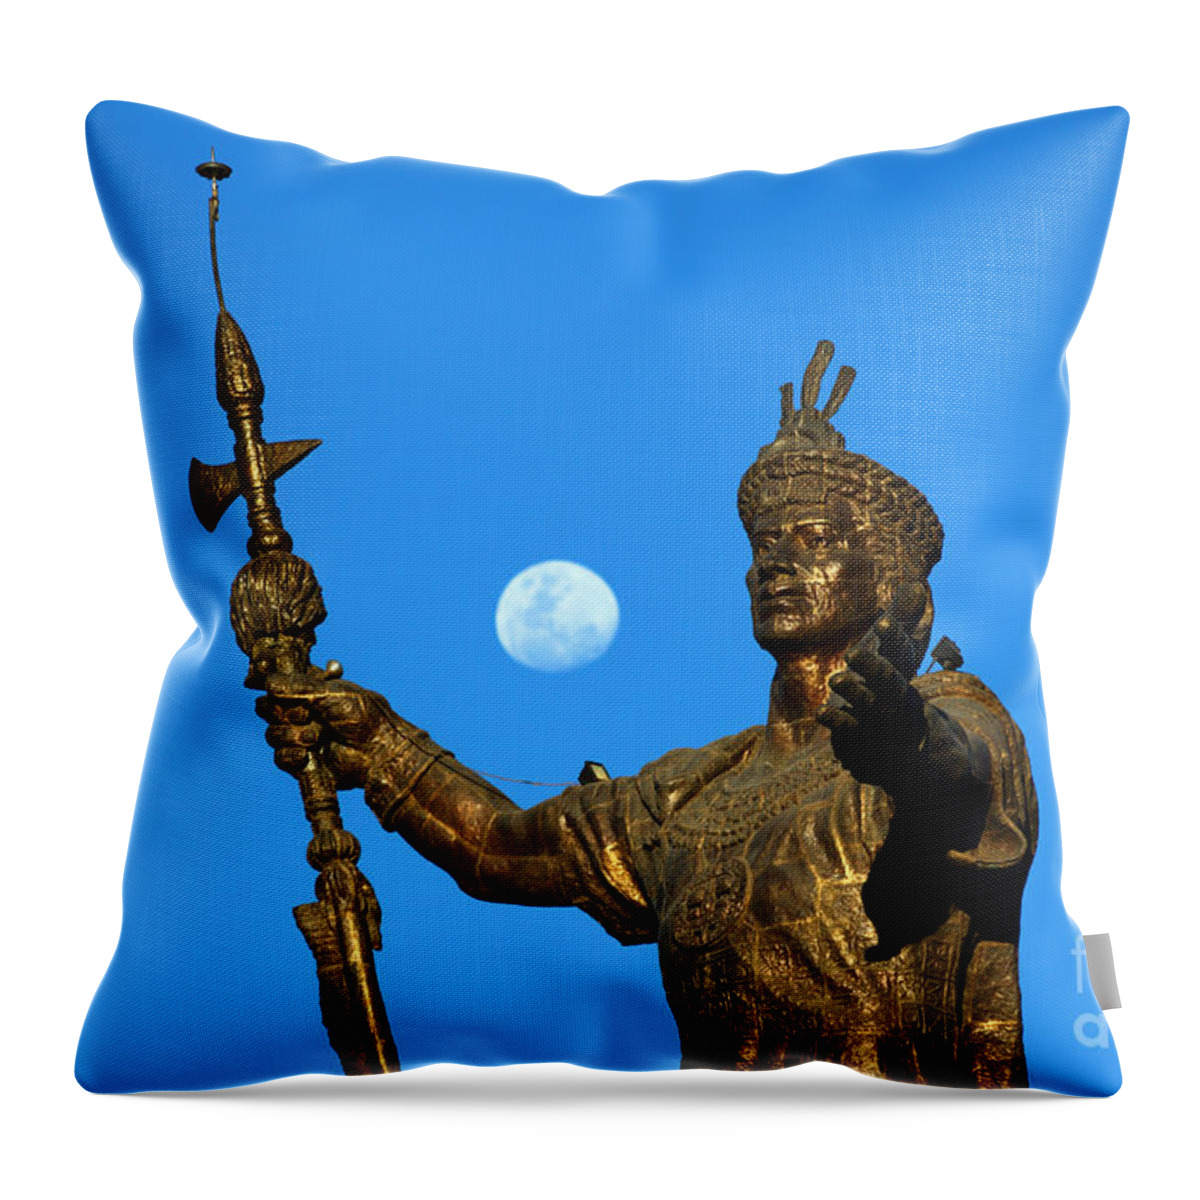 Peru Throw Pillow featuring the photograph Duality by James Brunker